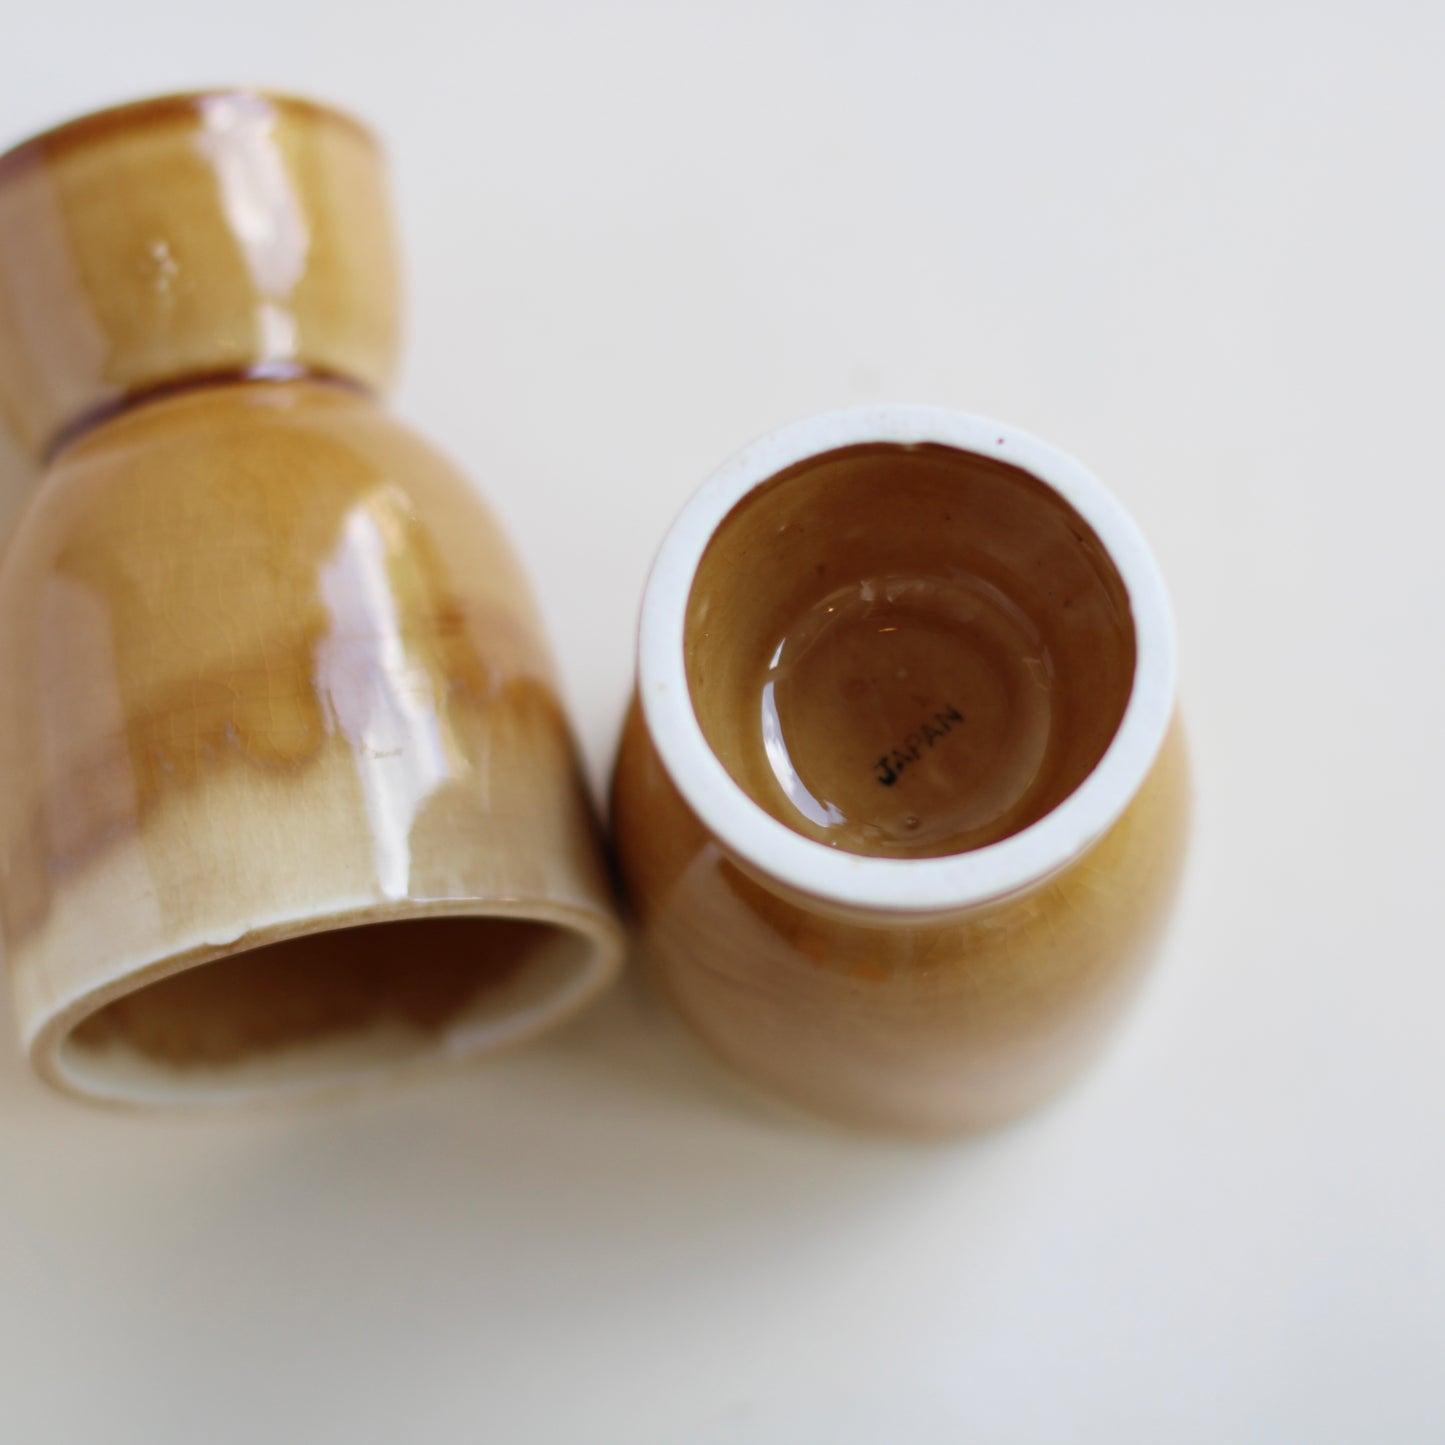 Pair of Ceramic Footed Tumblers from Japan